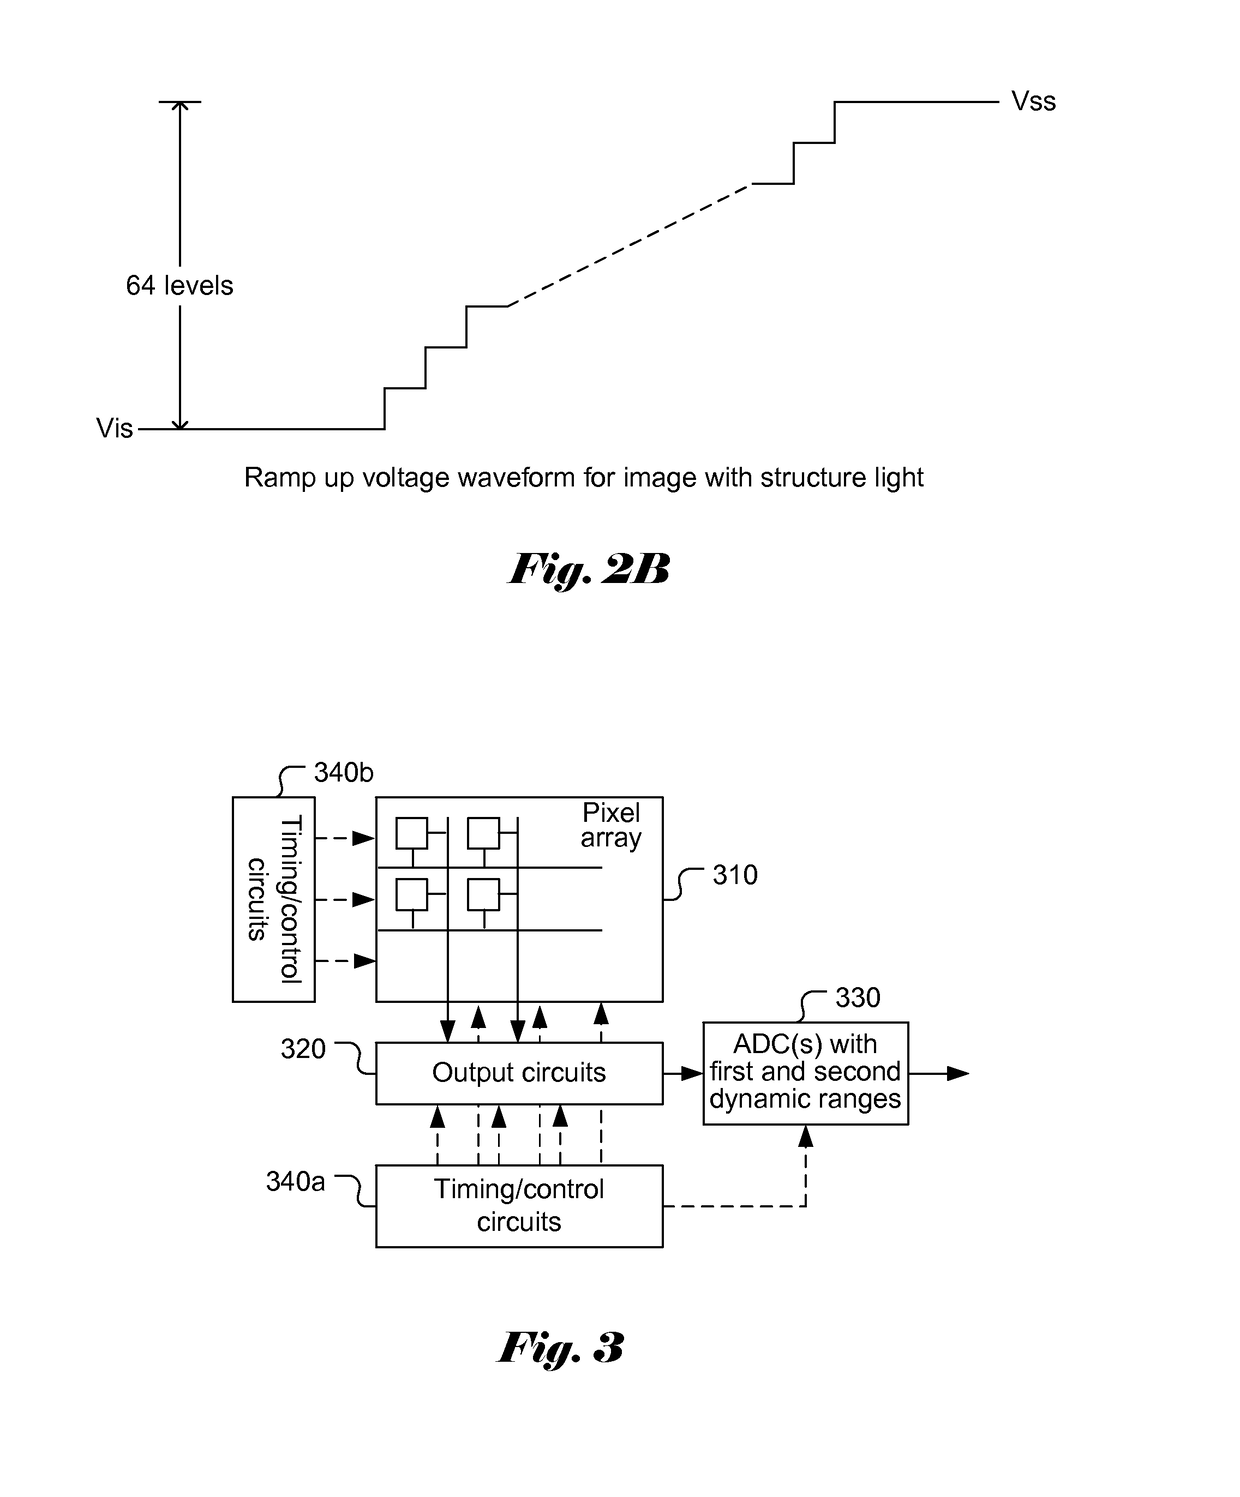 Single Image Sensor for Capturing Mixed Structured-light Images and Regular Images